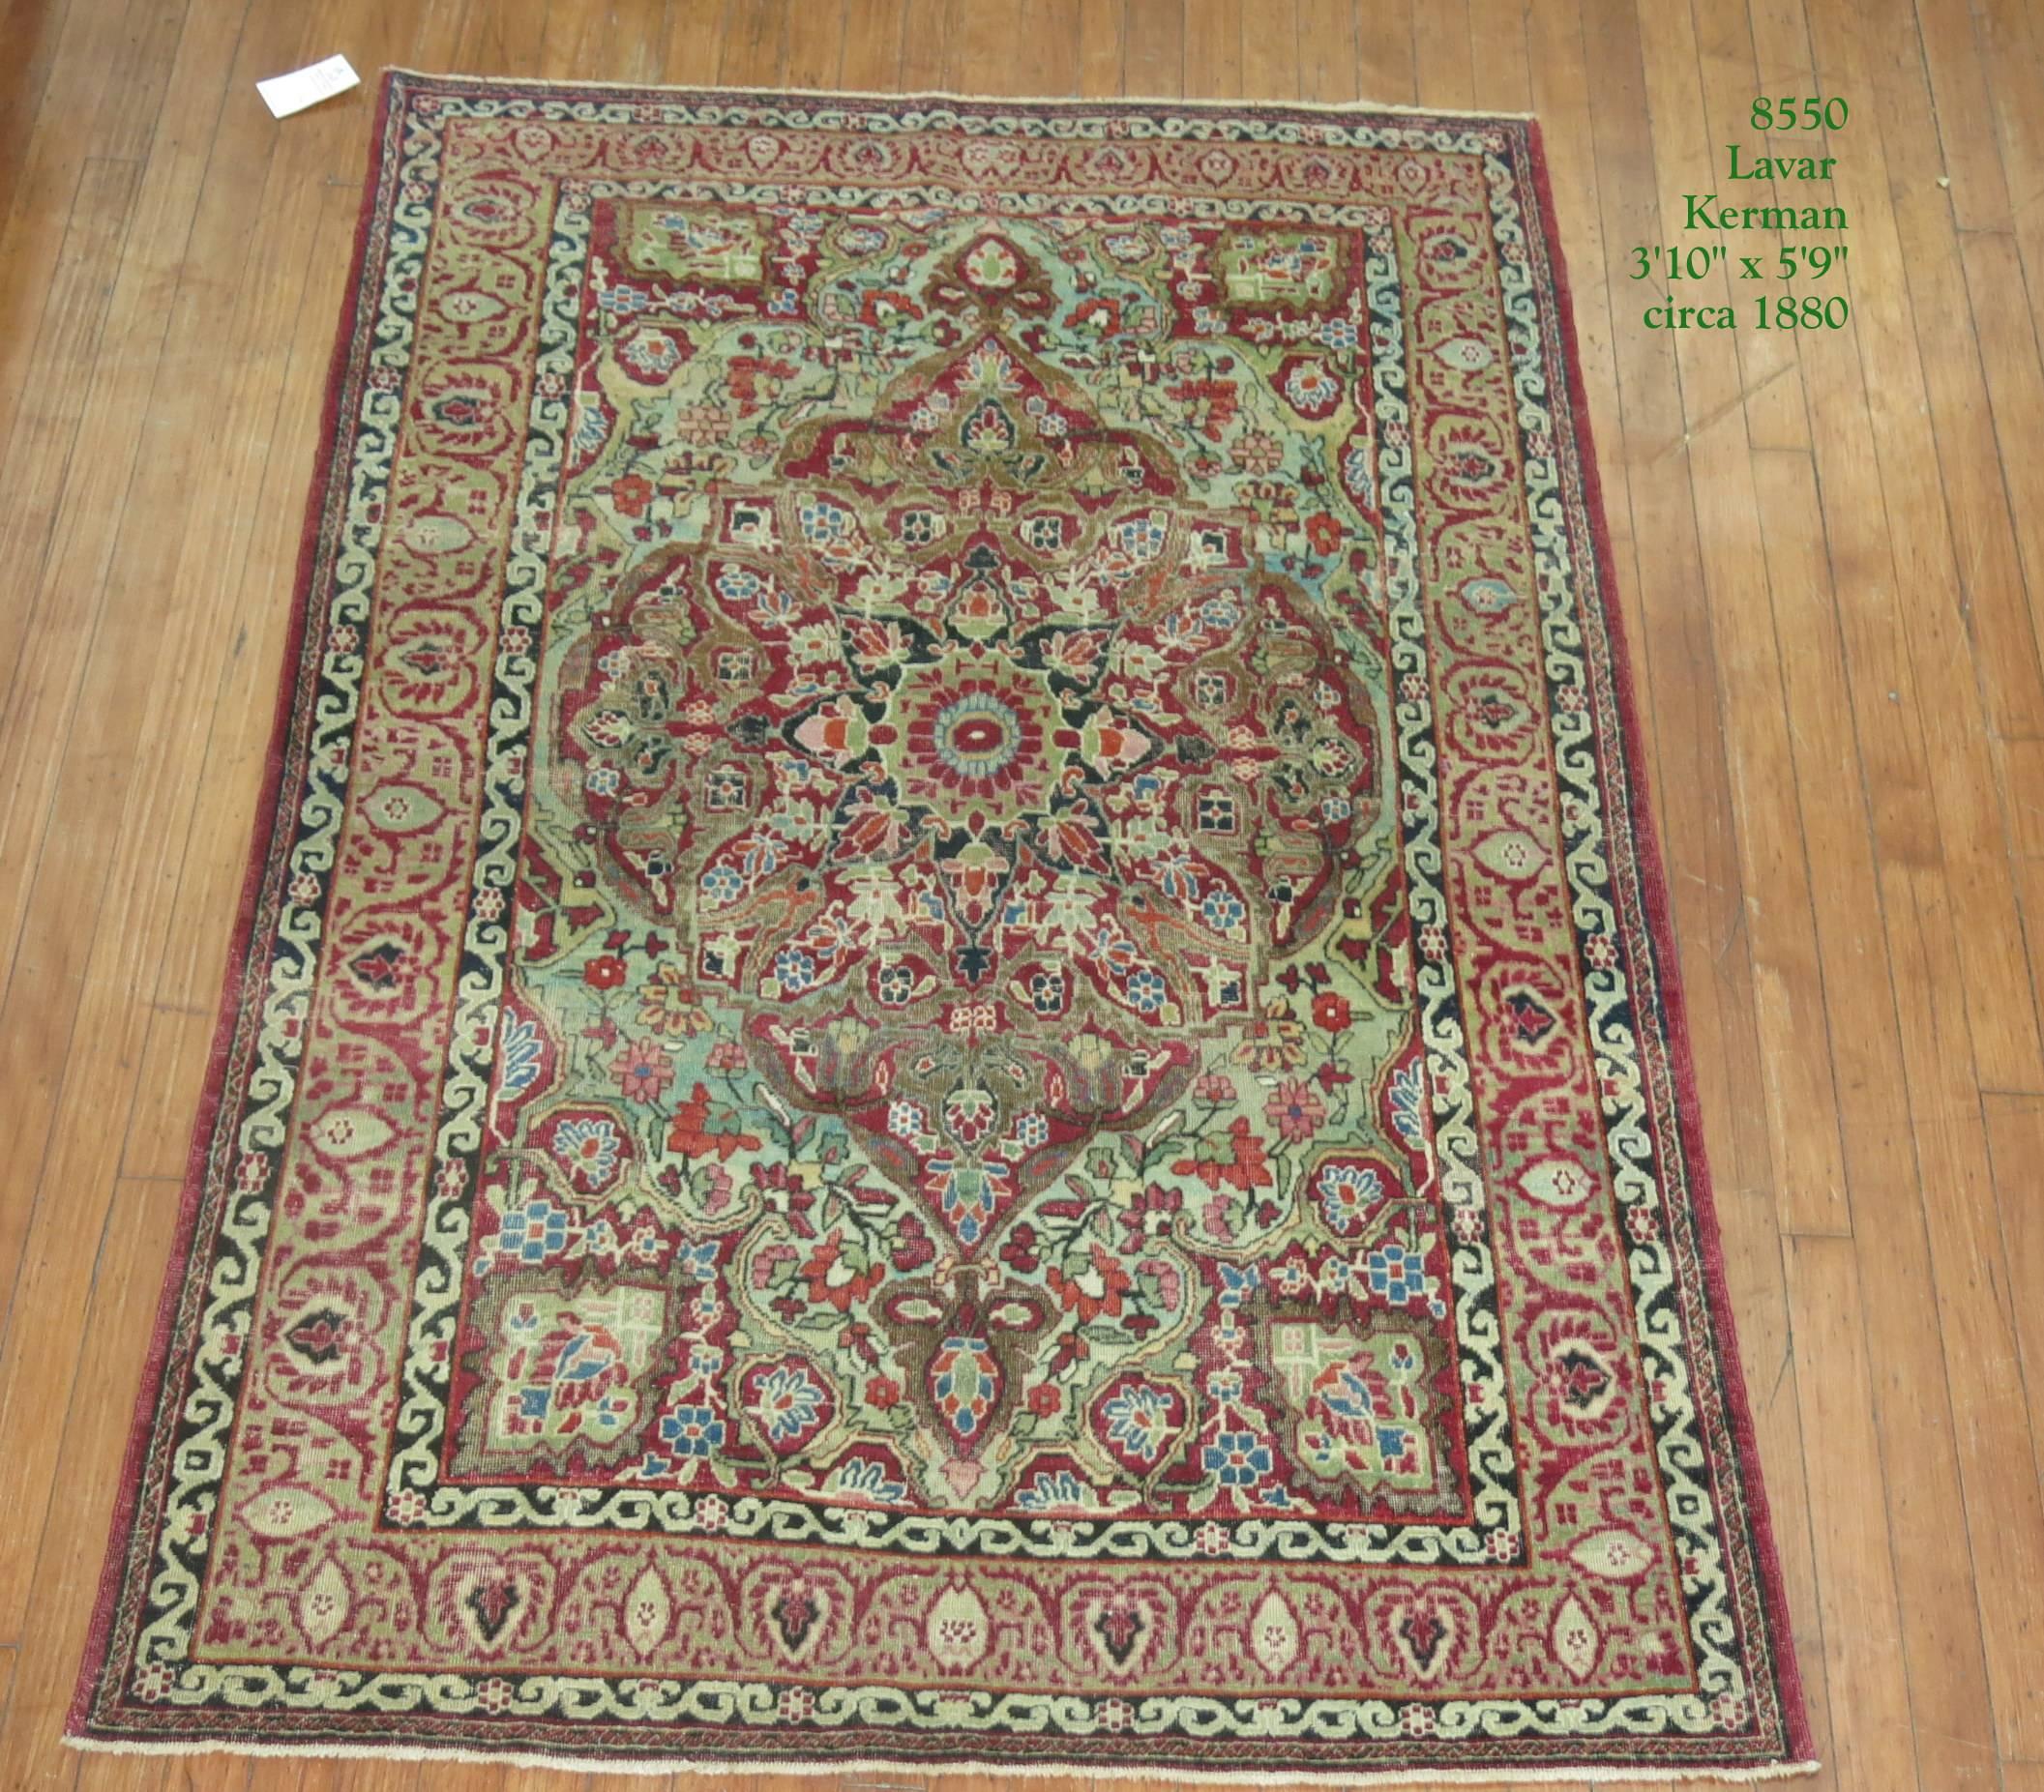 A late 19th century Persian Lavar Kerman rug featuring a tradtiional design in burgundy and celadon green 

Measures: 3'10